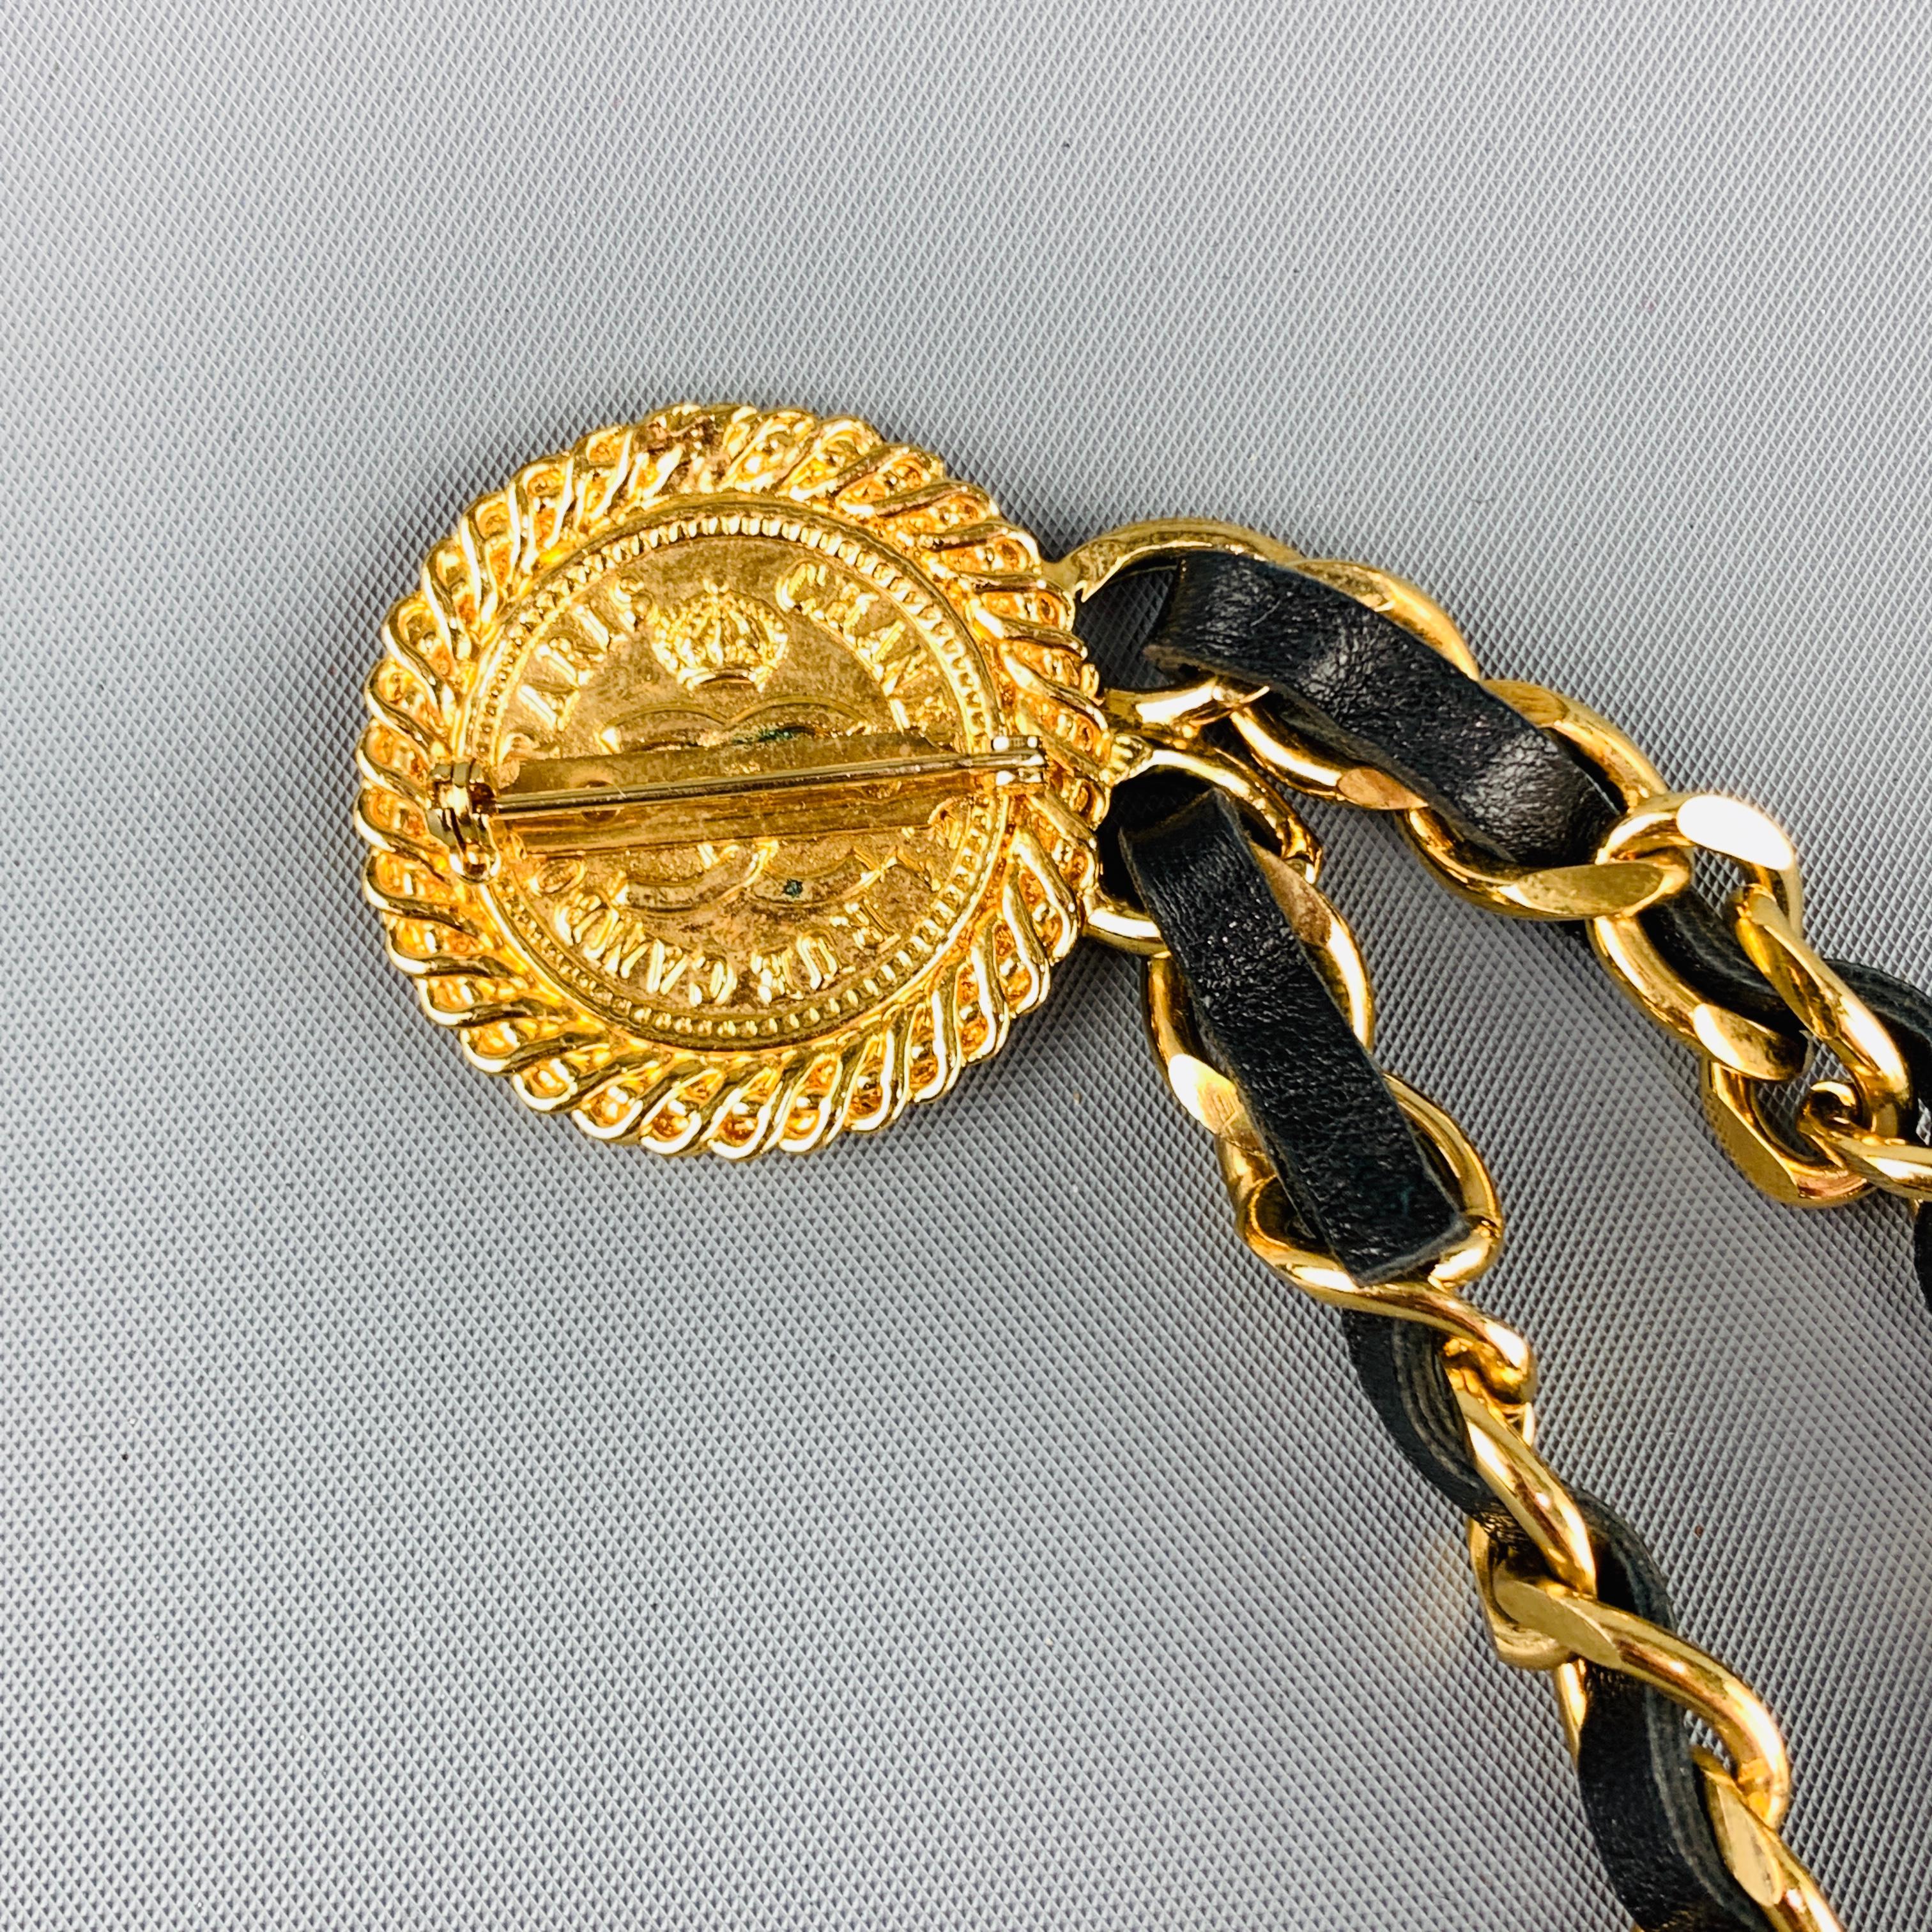 CHANEL Gold Tone Metal Leather Chain Triple 3 Pin Chatelaine Brooch - Season 28 5